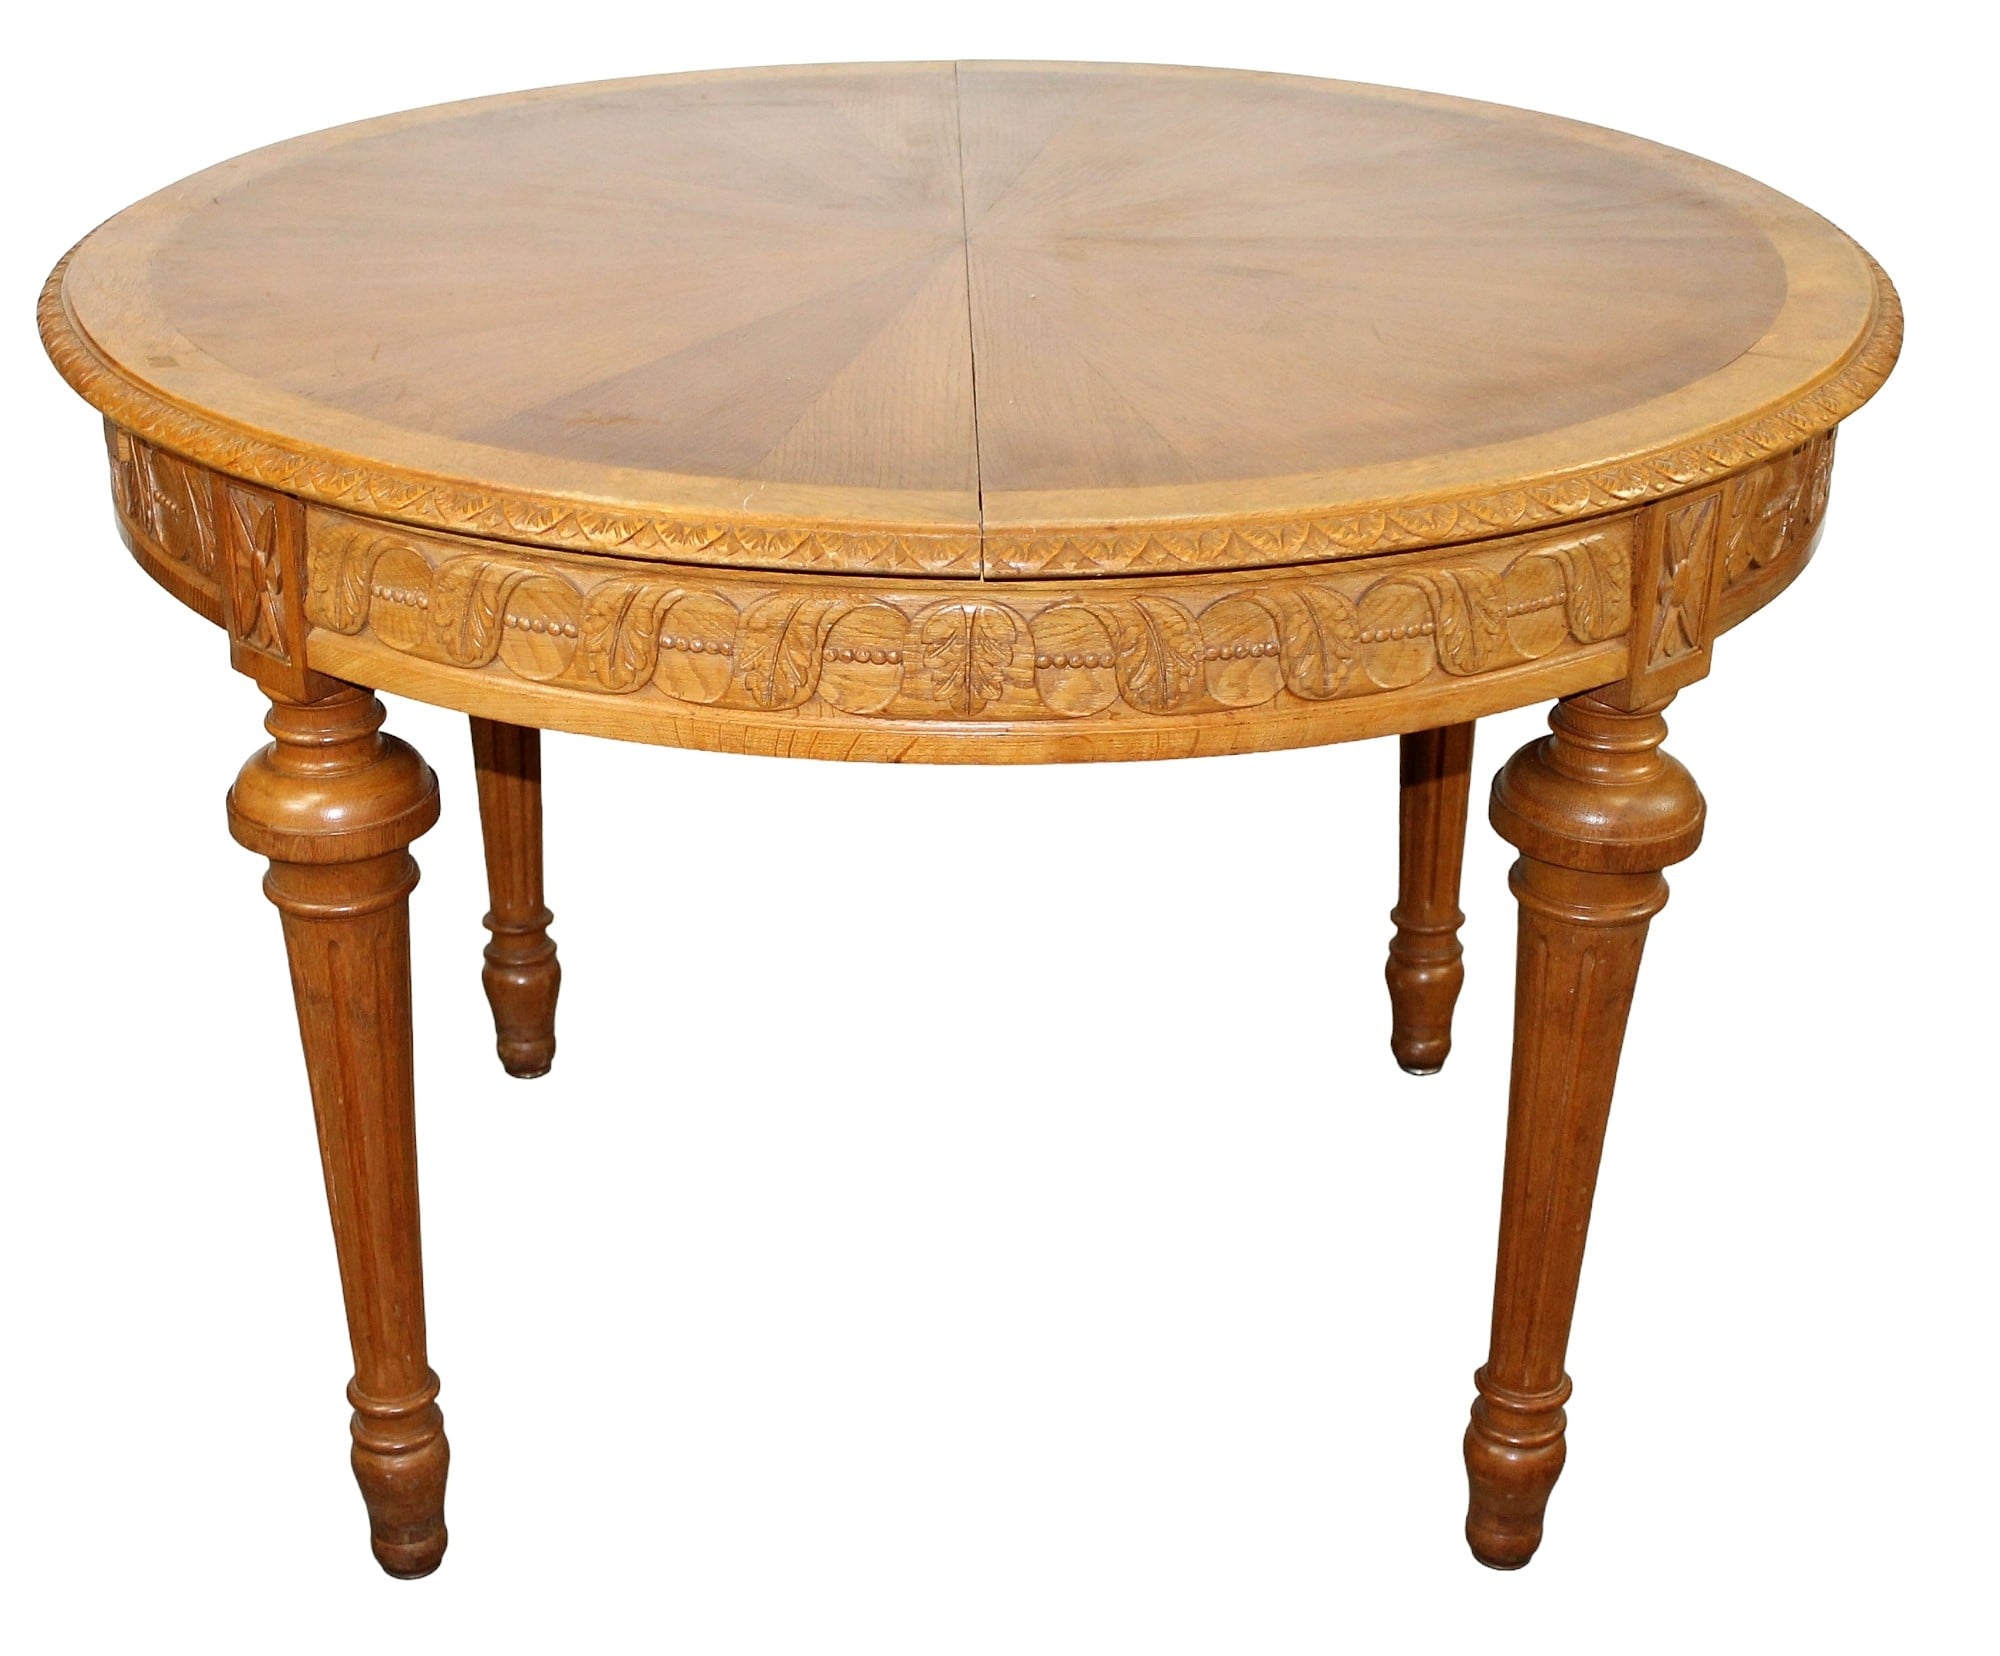 French Neo- Classical table with fluted legs